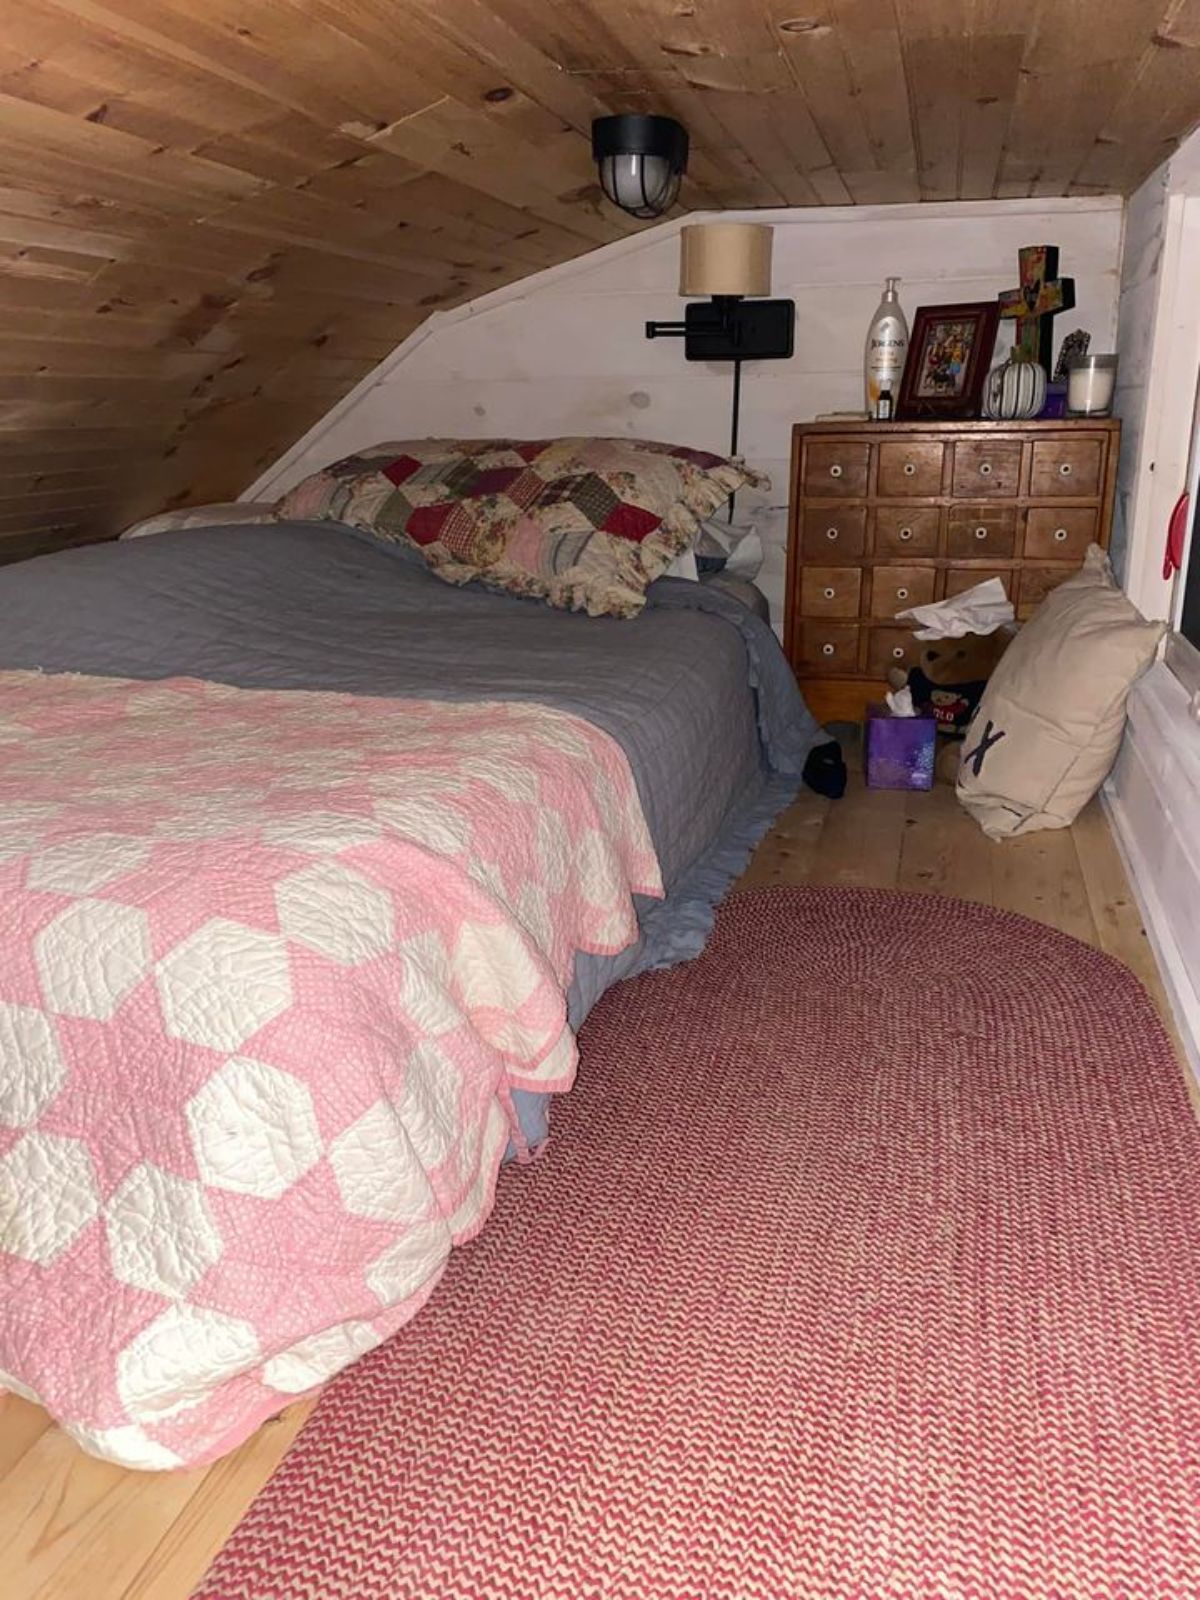 Bedroom of 198 sf Tiny Cottage has a queen bed still left with many space for other things